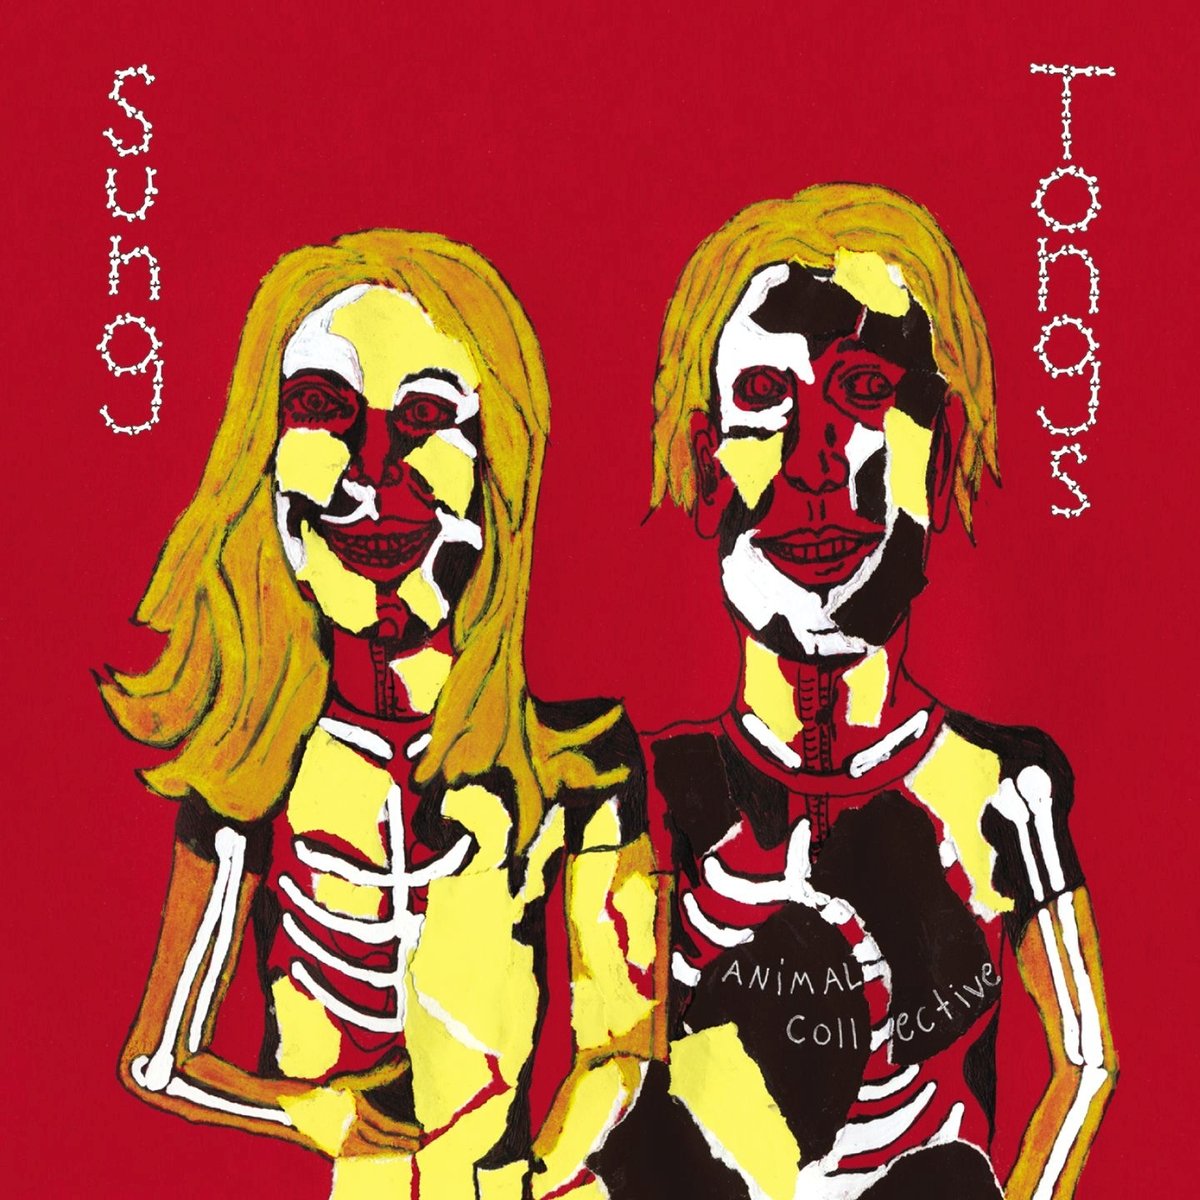 Animal Collective's "Sung Tongs" Album Cover